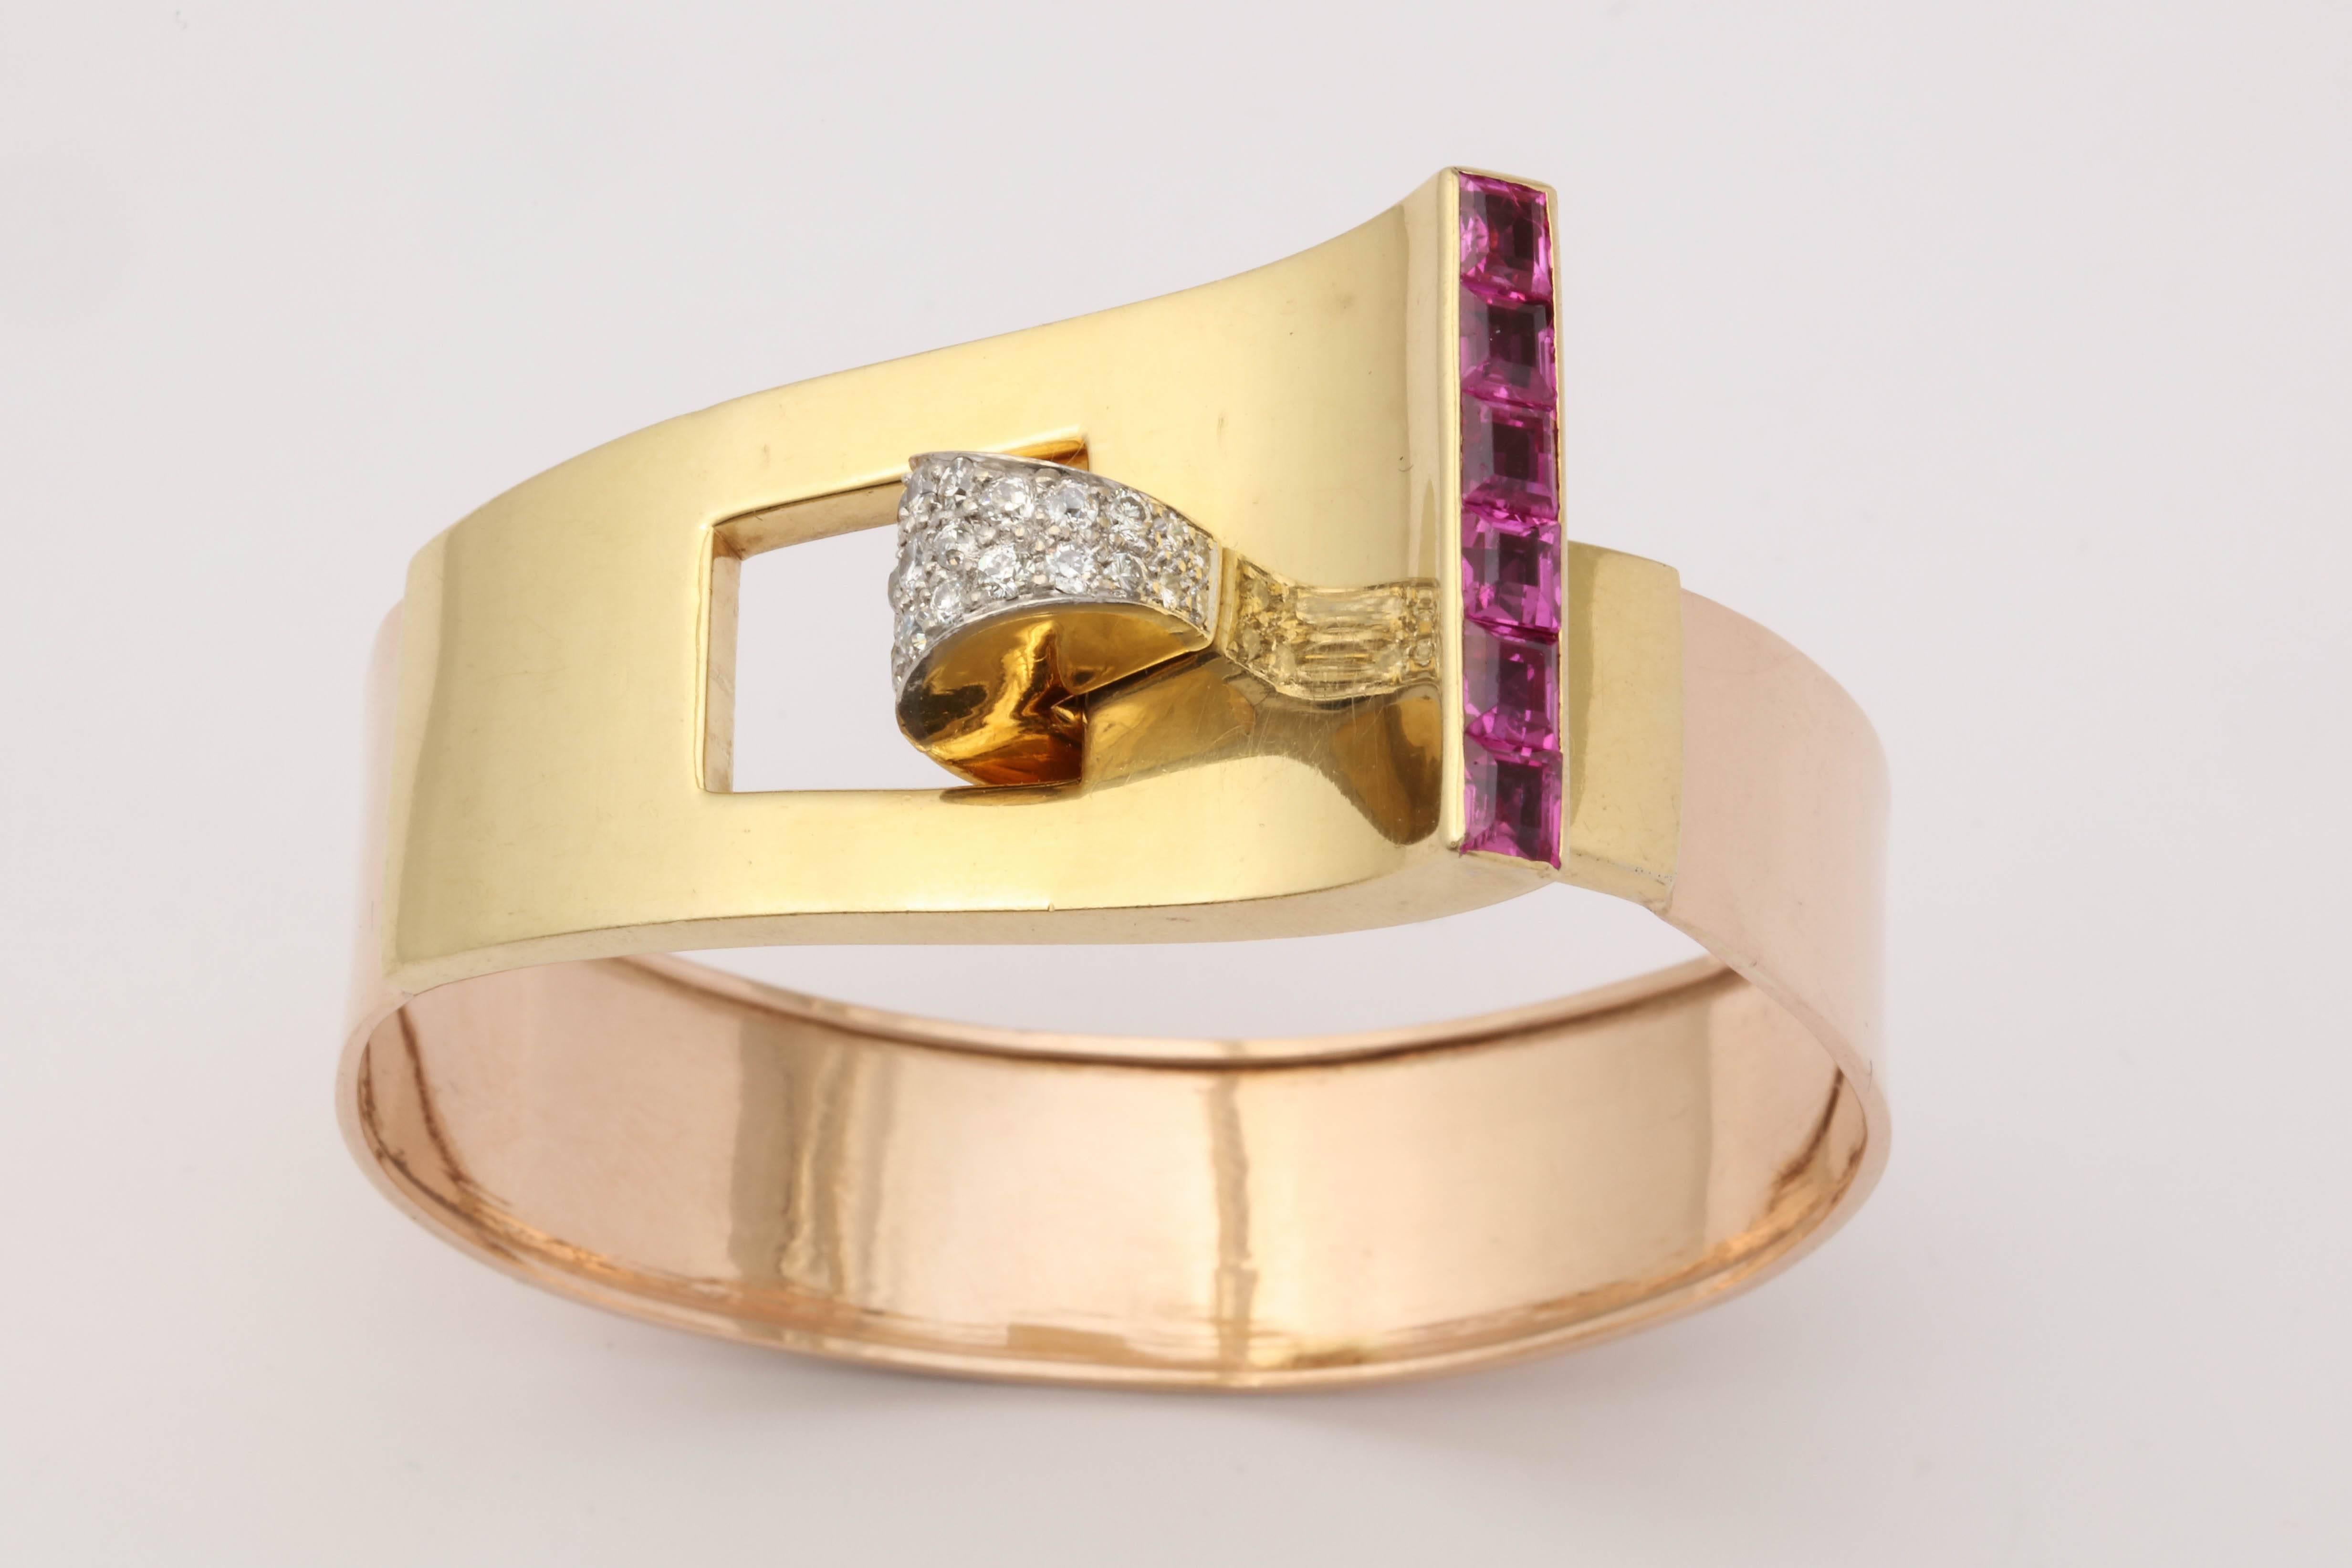 1940s Buckle Design Pink Sapphires with Diamonds Gold Bangle Cuff Bracelet 3